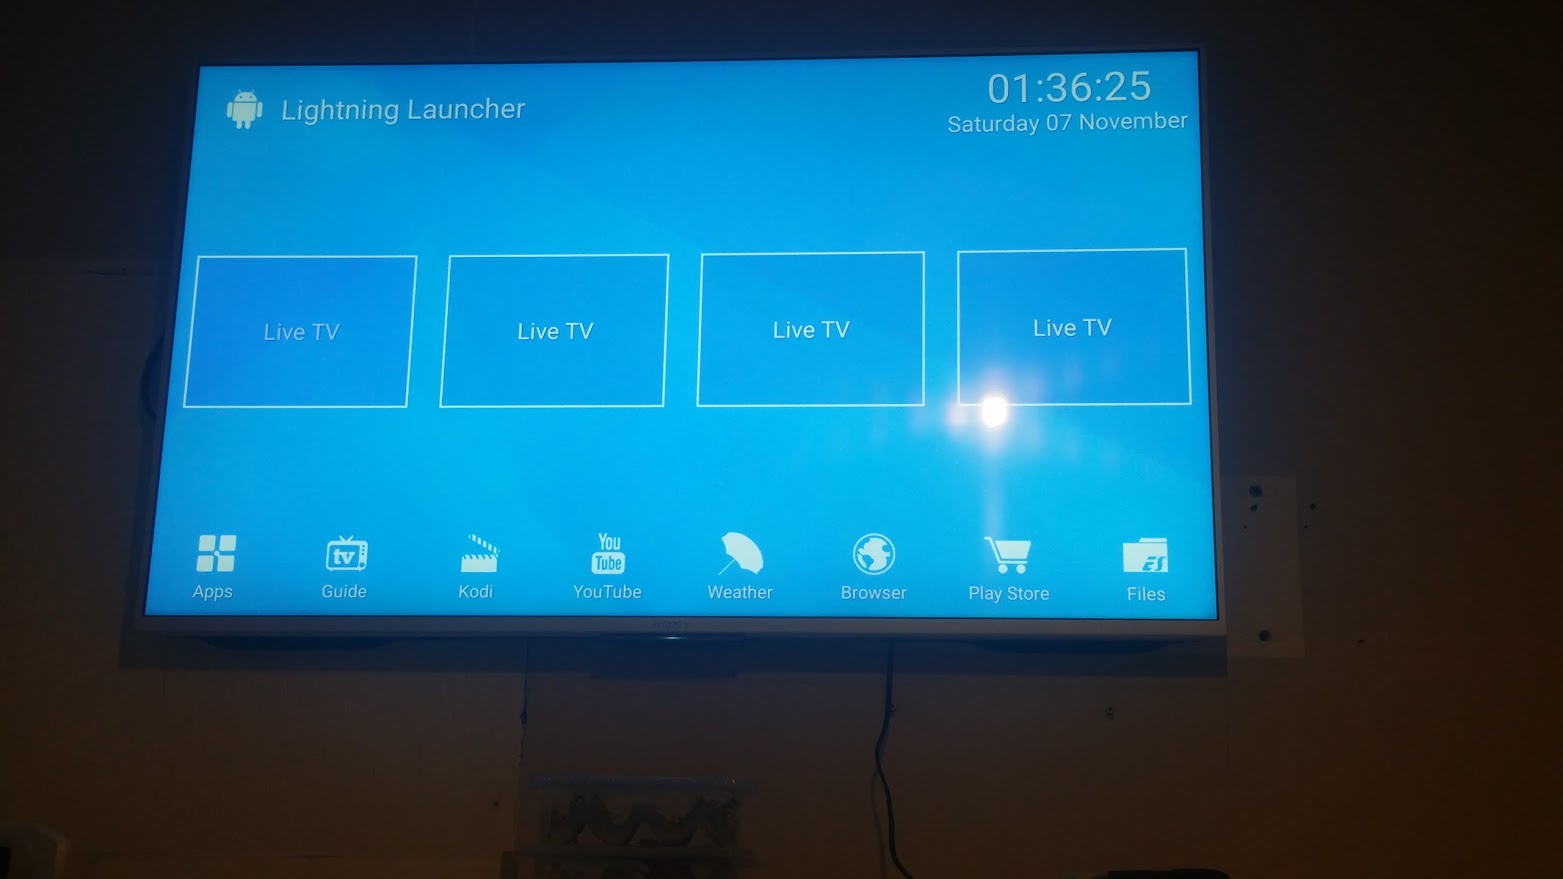 What i use to see after switching tv on.jpg